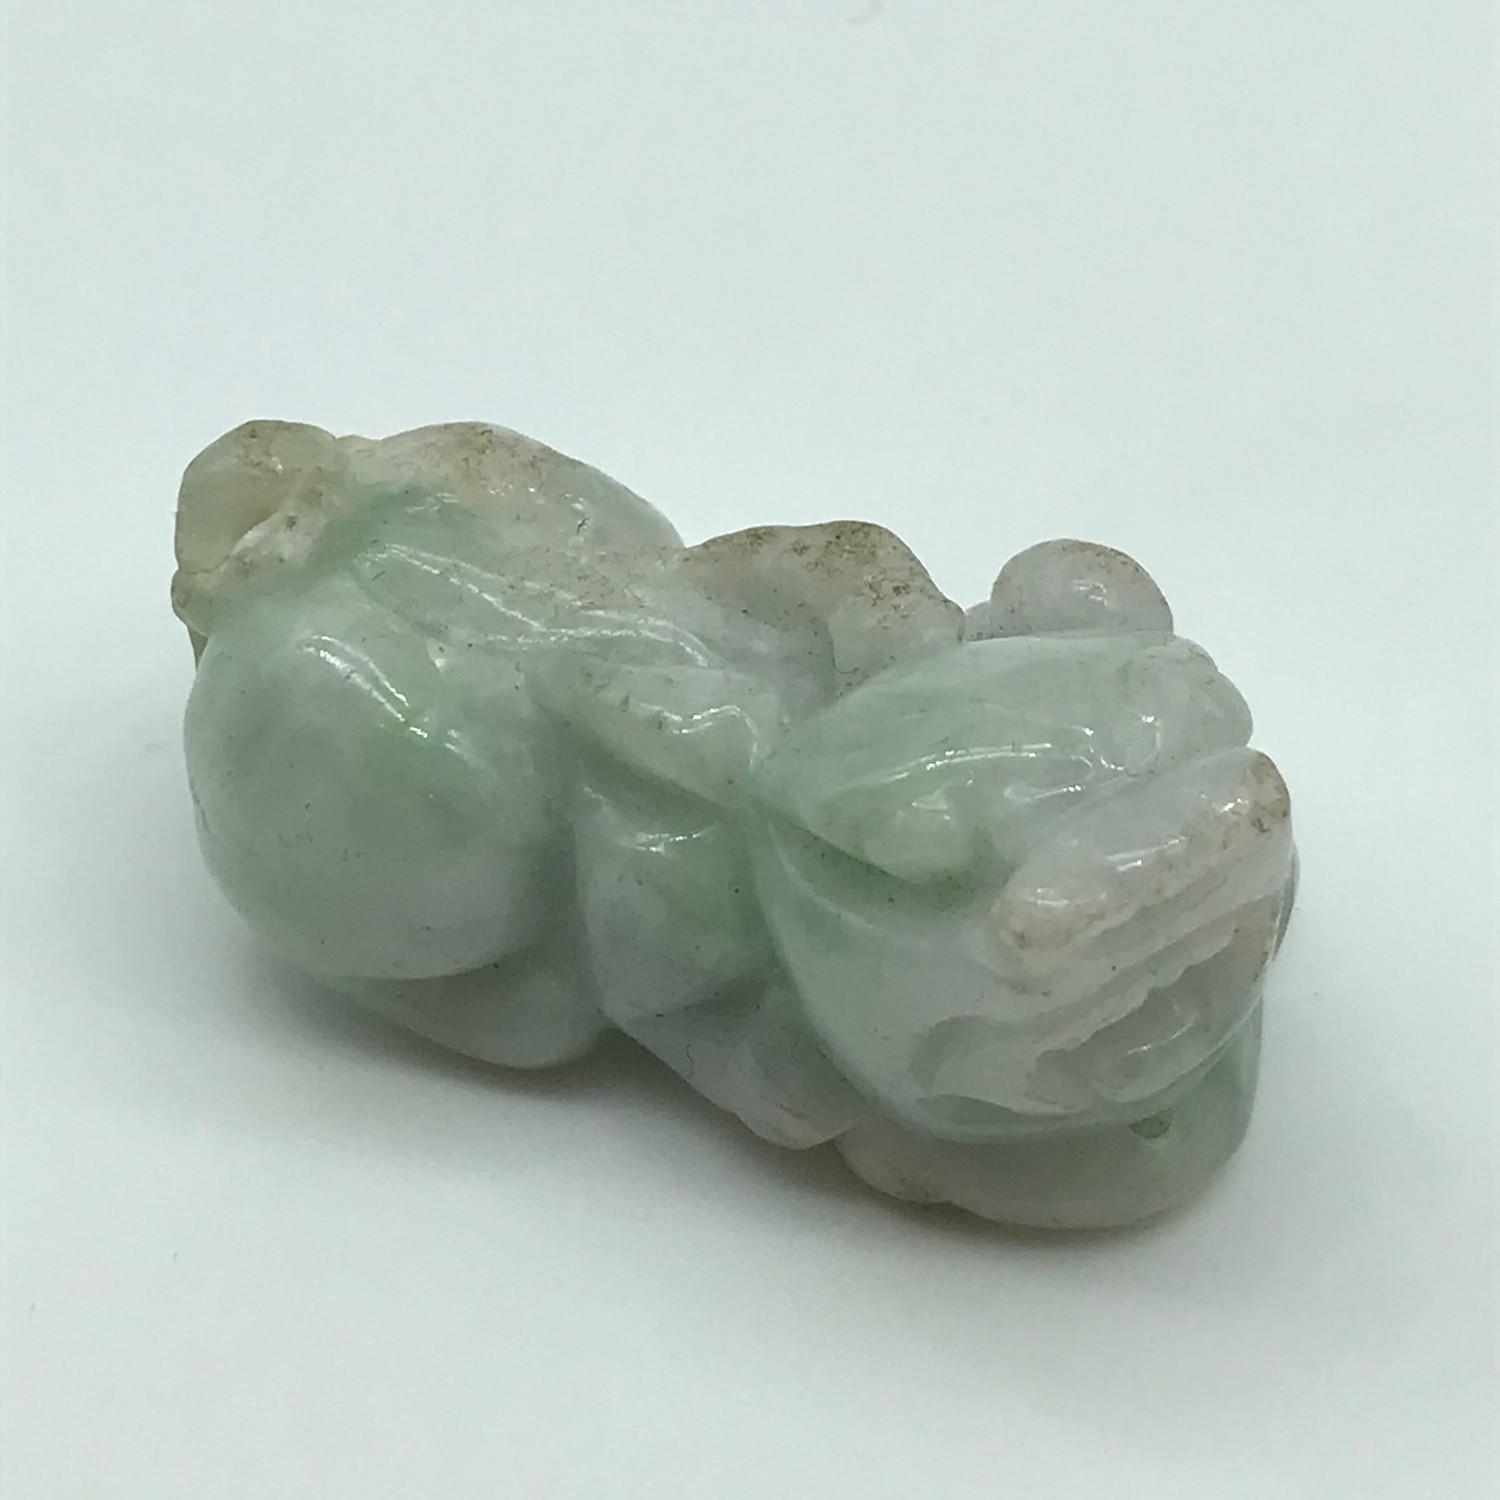 Antique Chinese hand carved jade foo dog sculpture [Measures 3.3 cm in length]